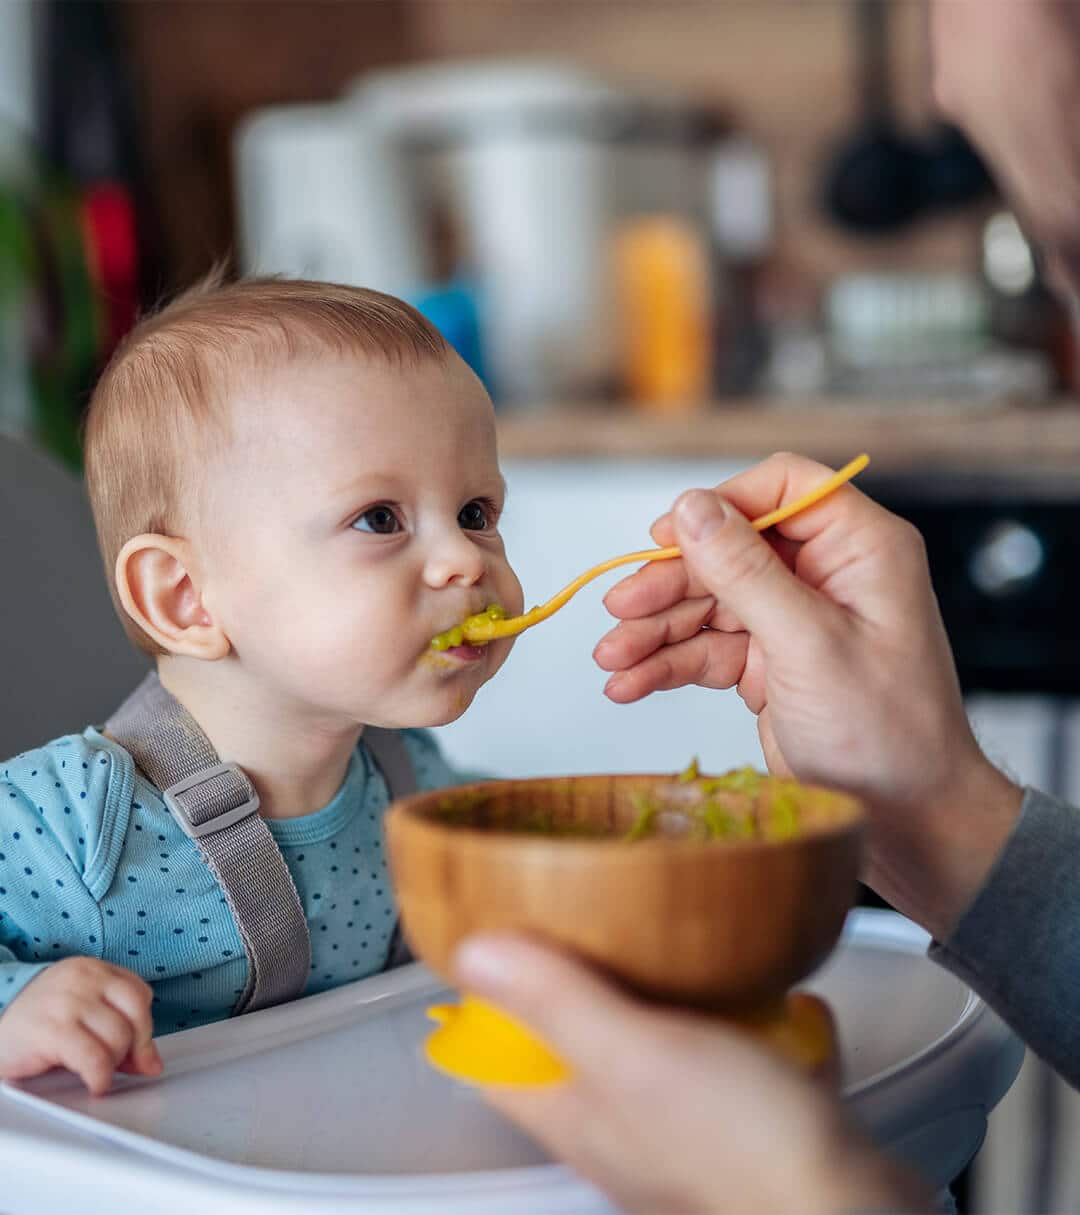 How do I know when to start weaning?